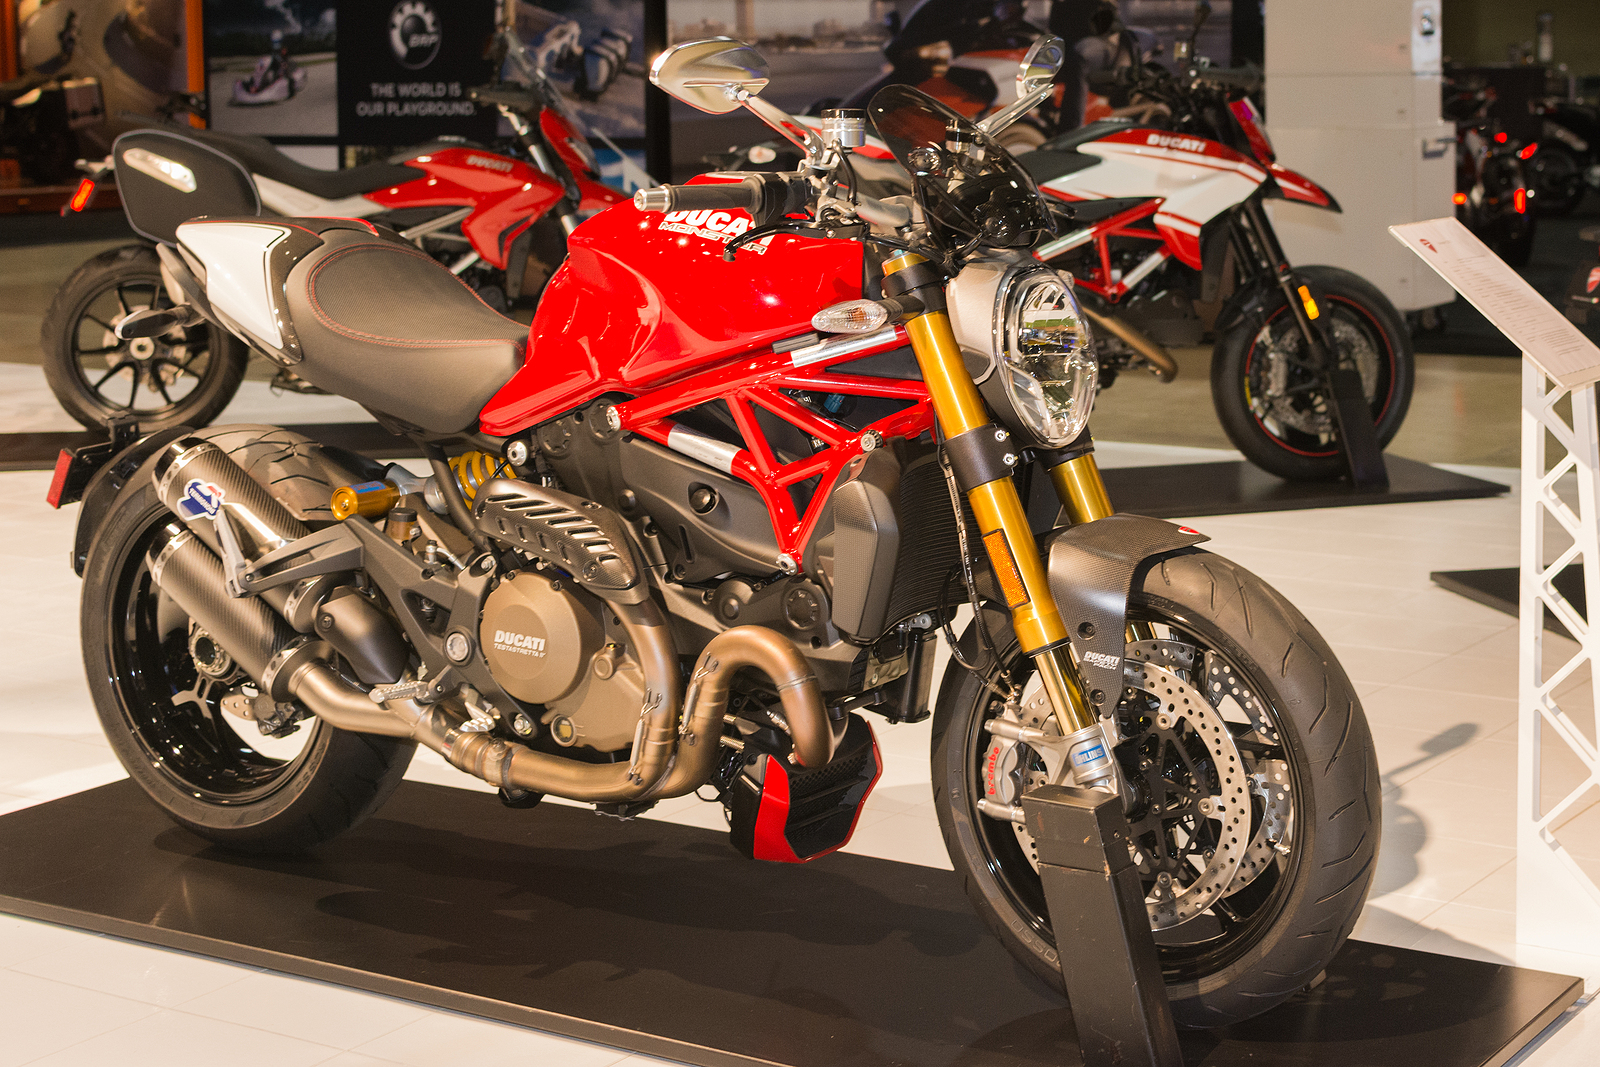 Top 5 Luxury Motorbikes That Are Driving the Industry in 2020